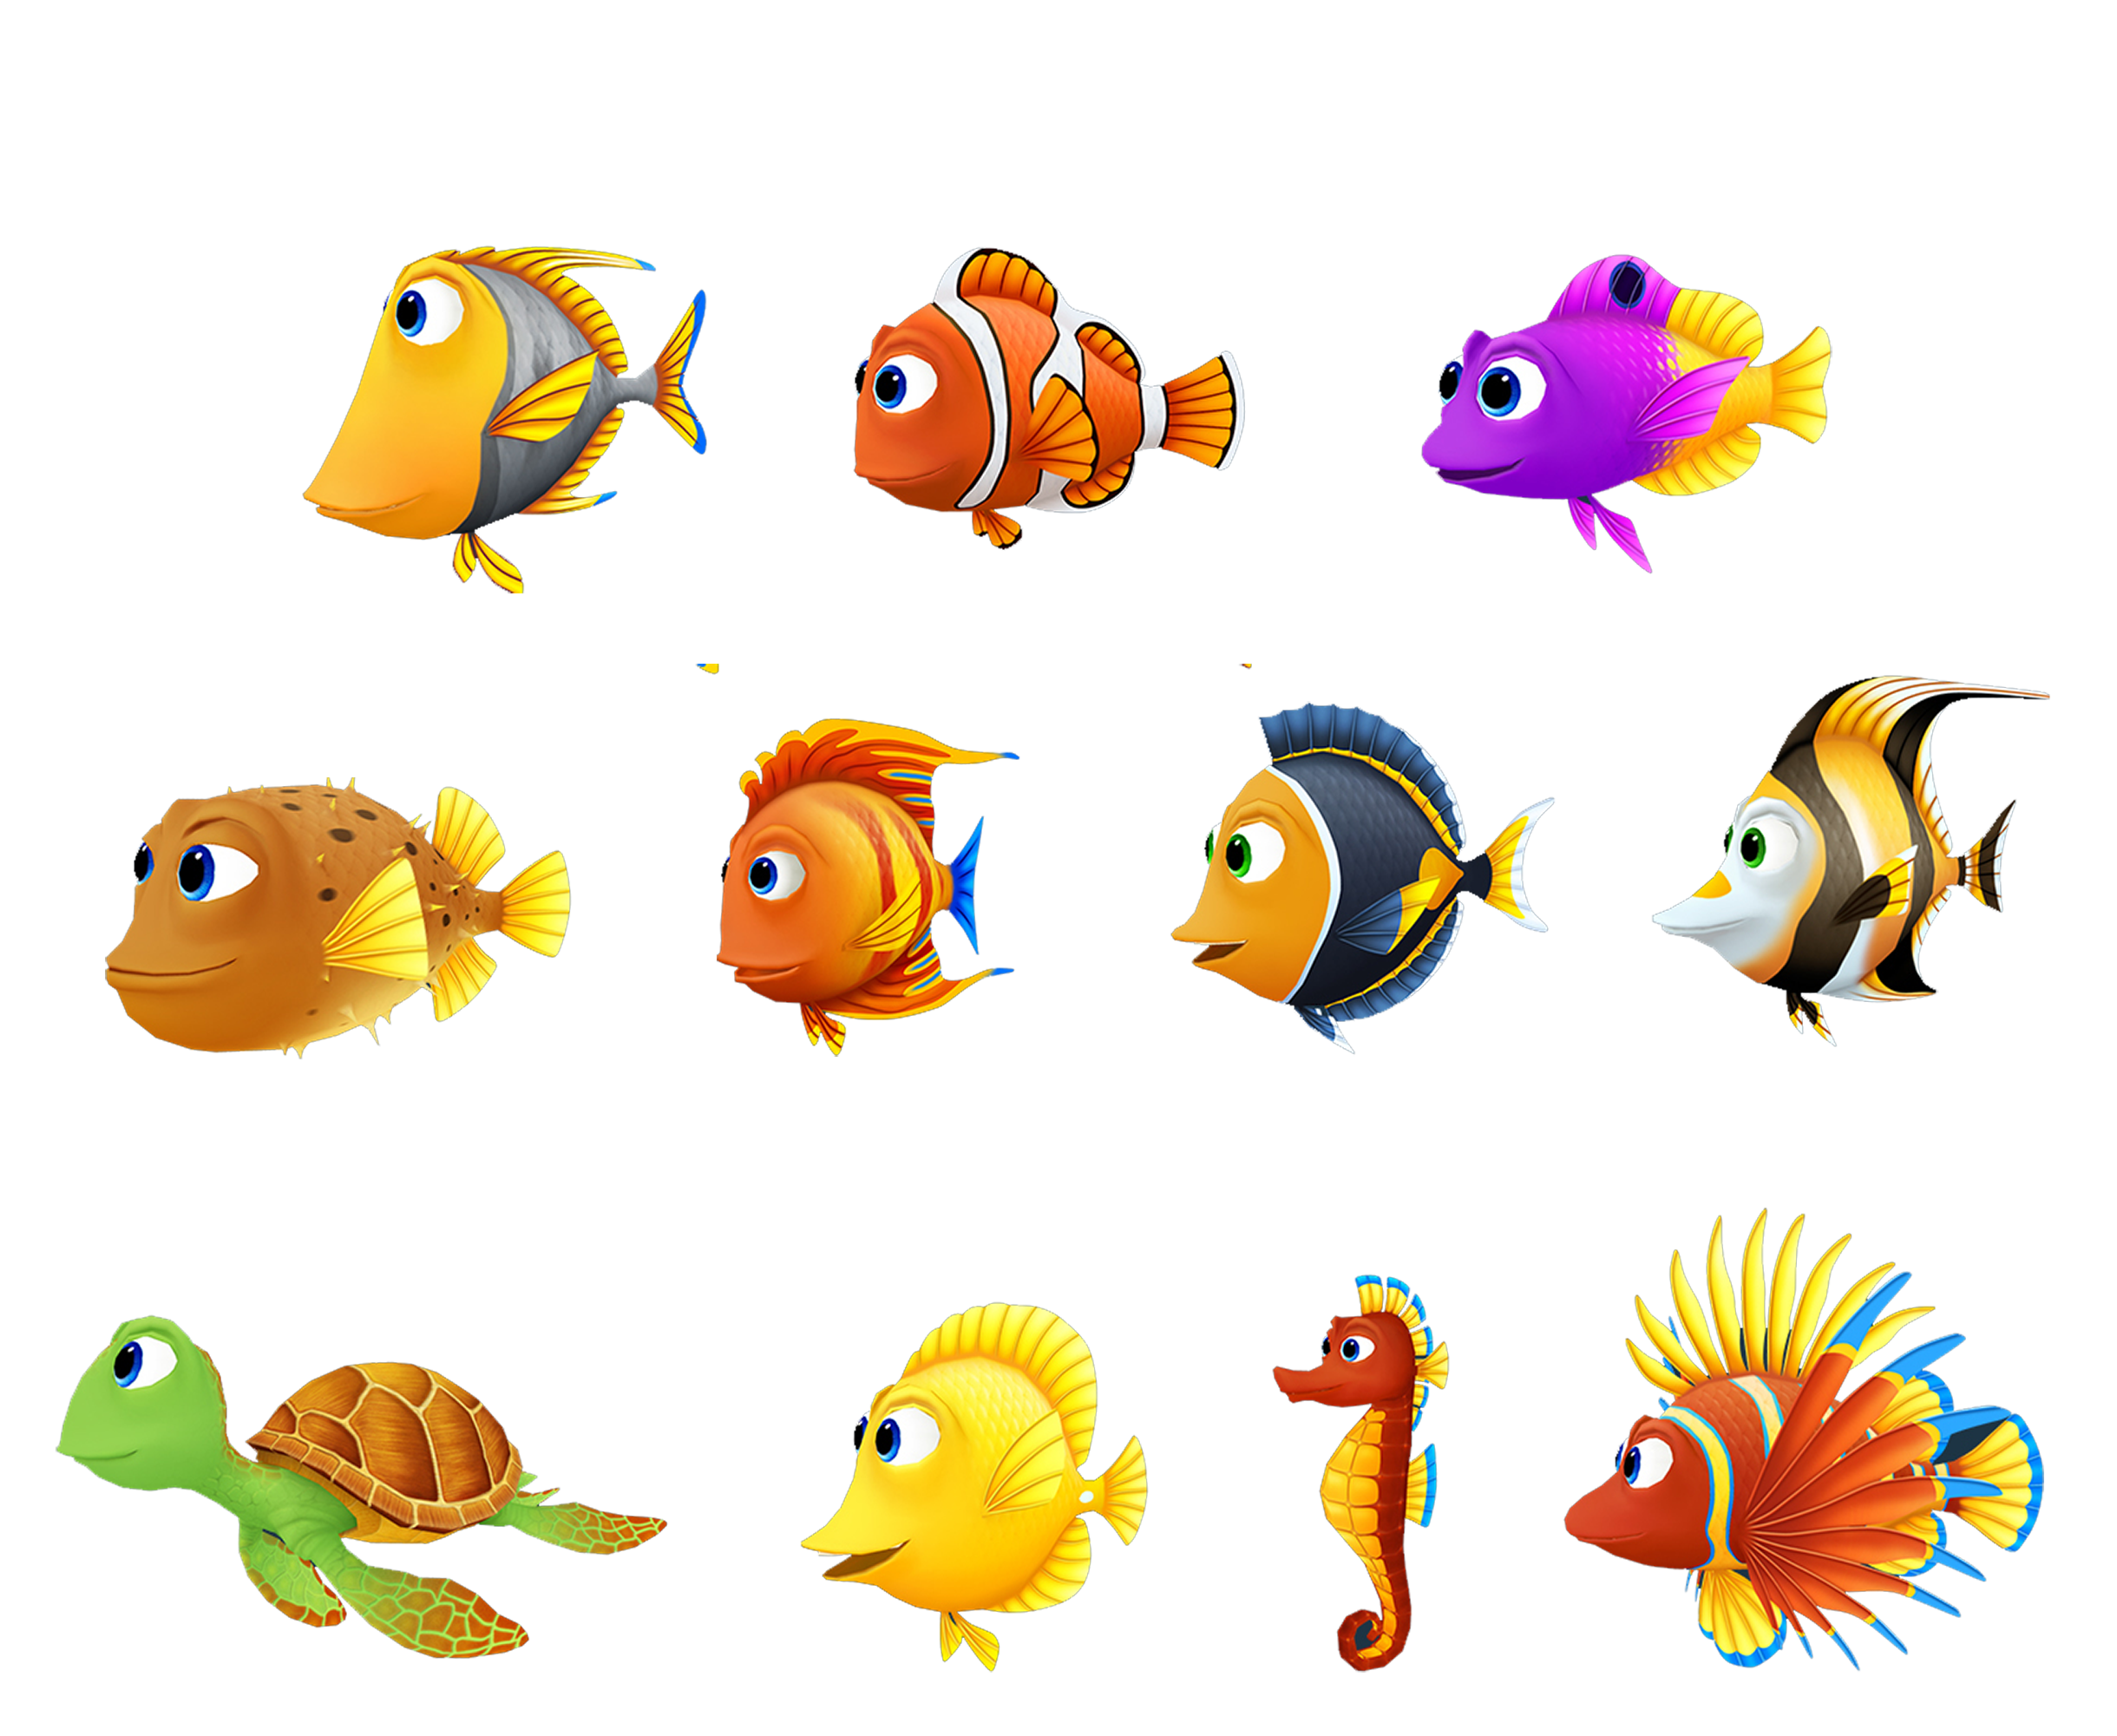 Finding Nemo PNG Image